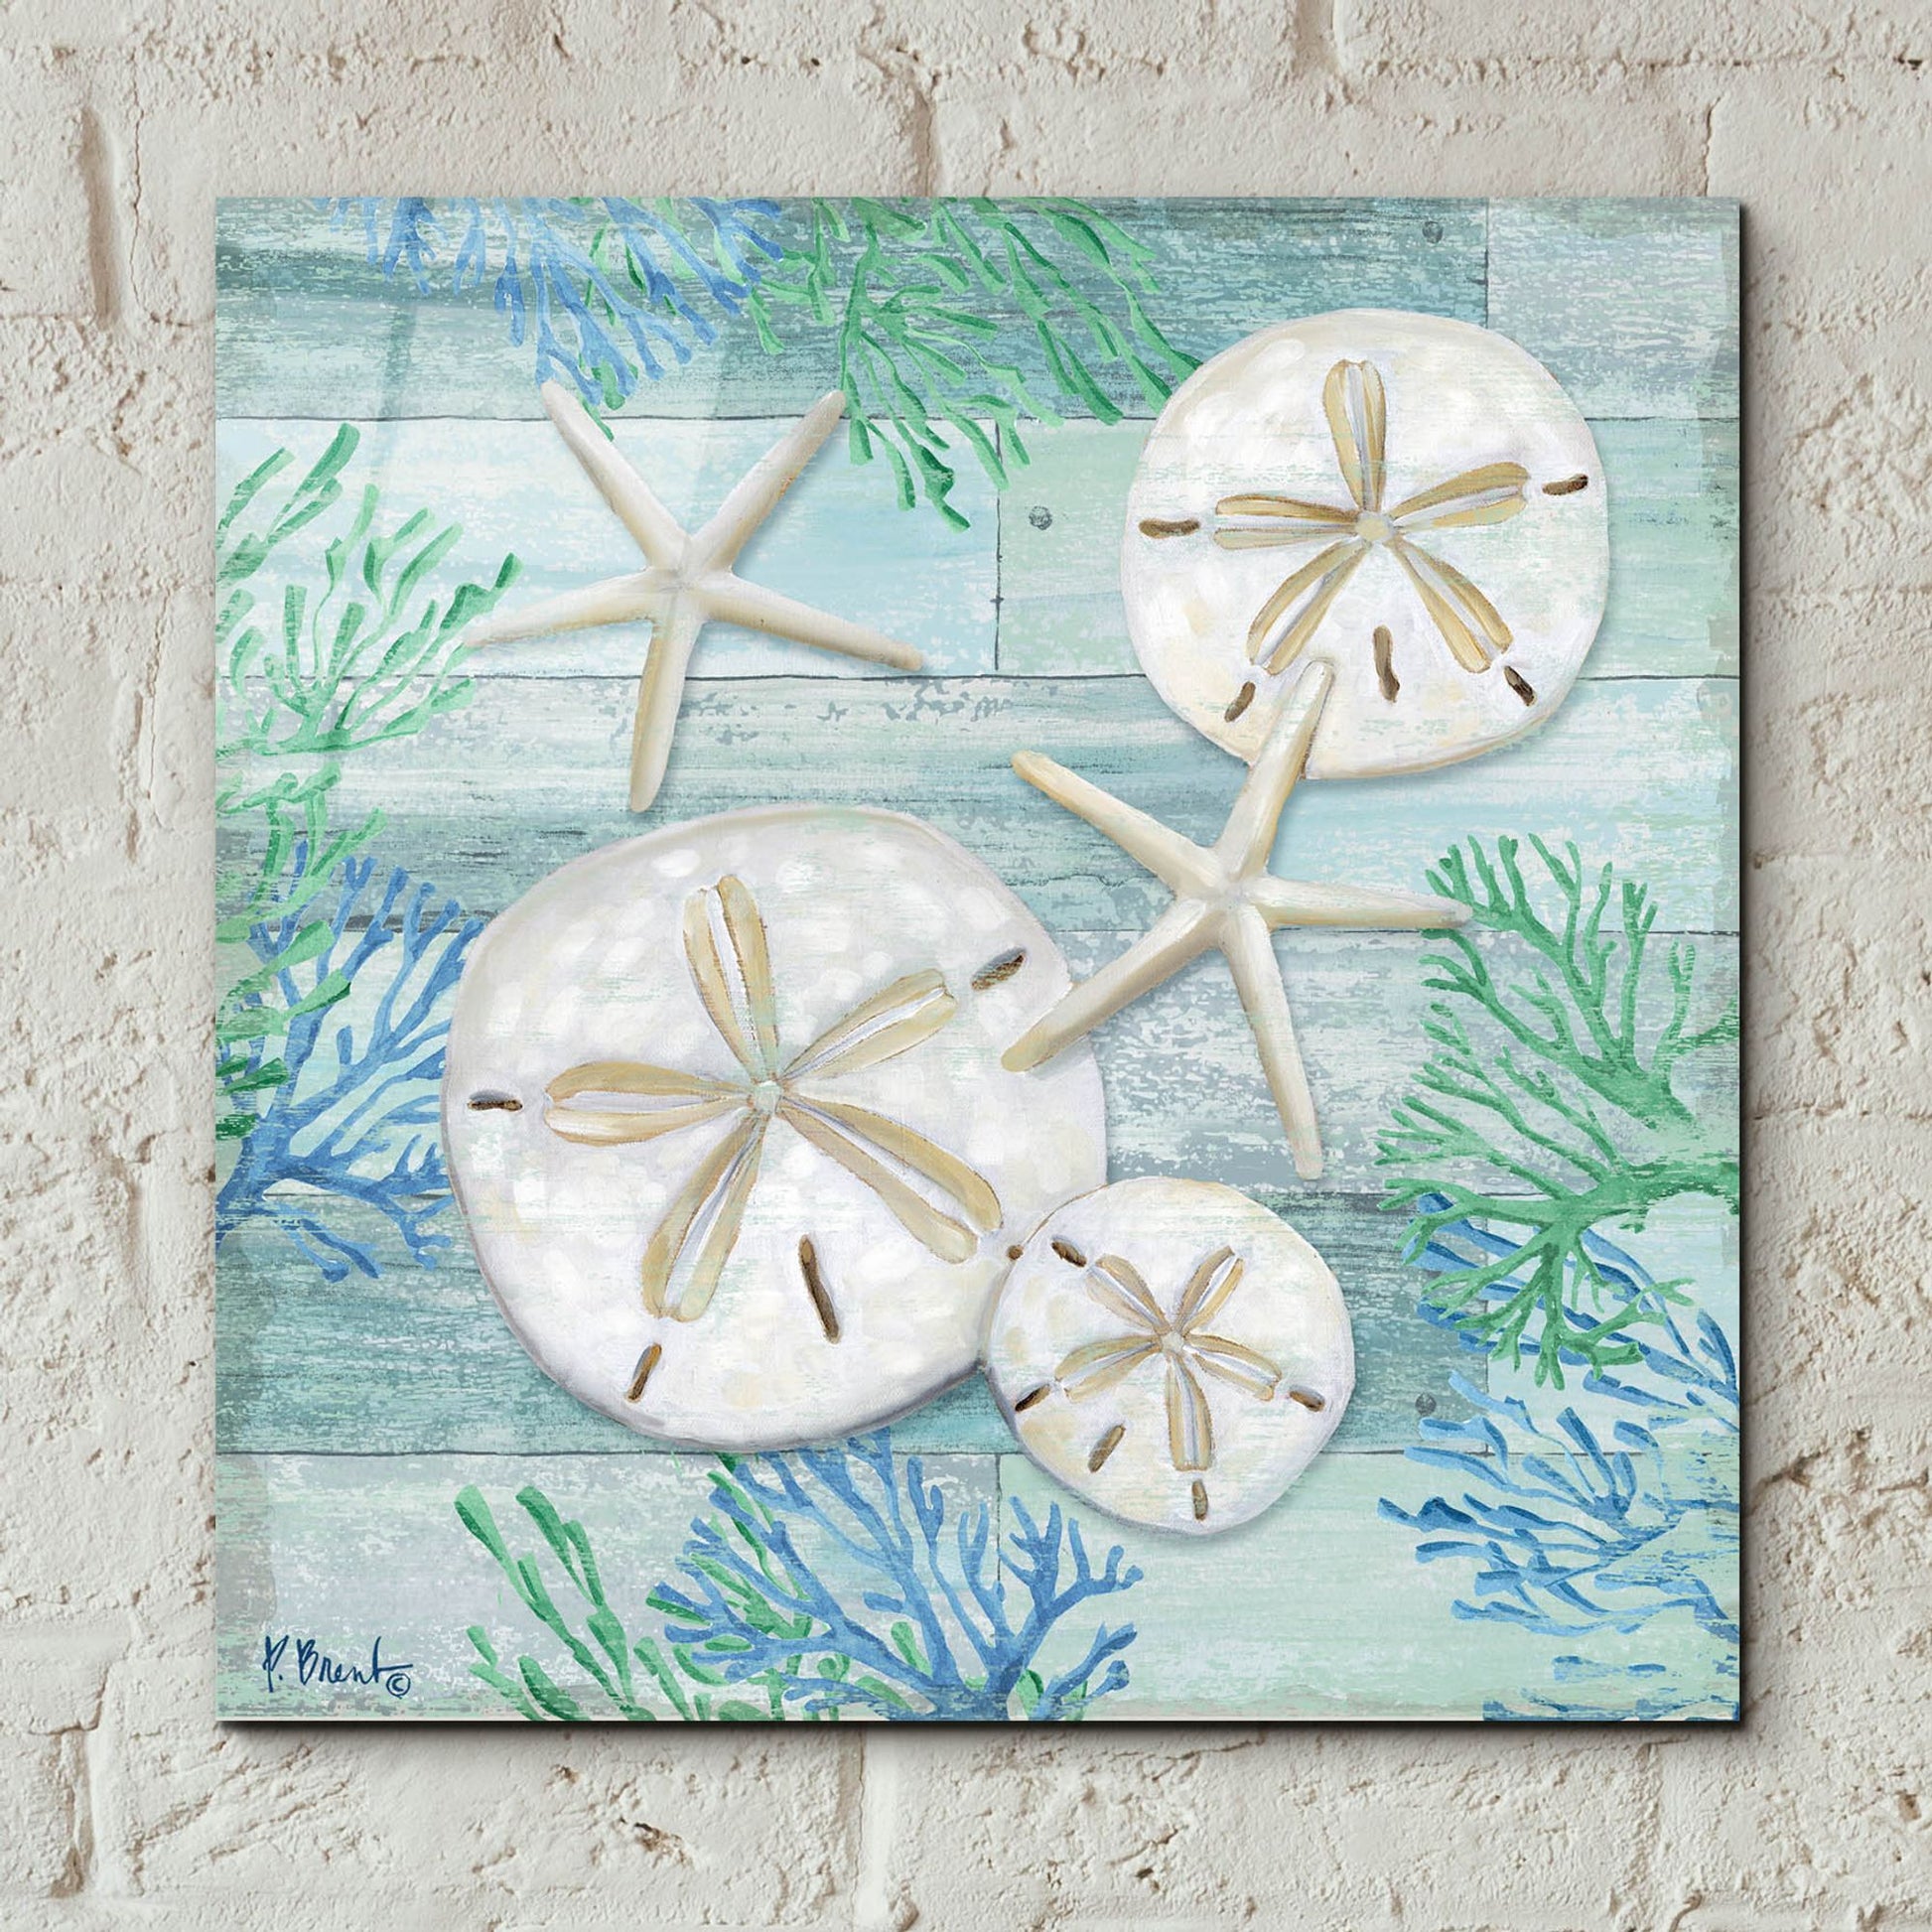 Epic Art 'Clearwater Shells I' by Paul Brent, Acrylic Glass Wall Art,12x12